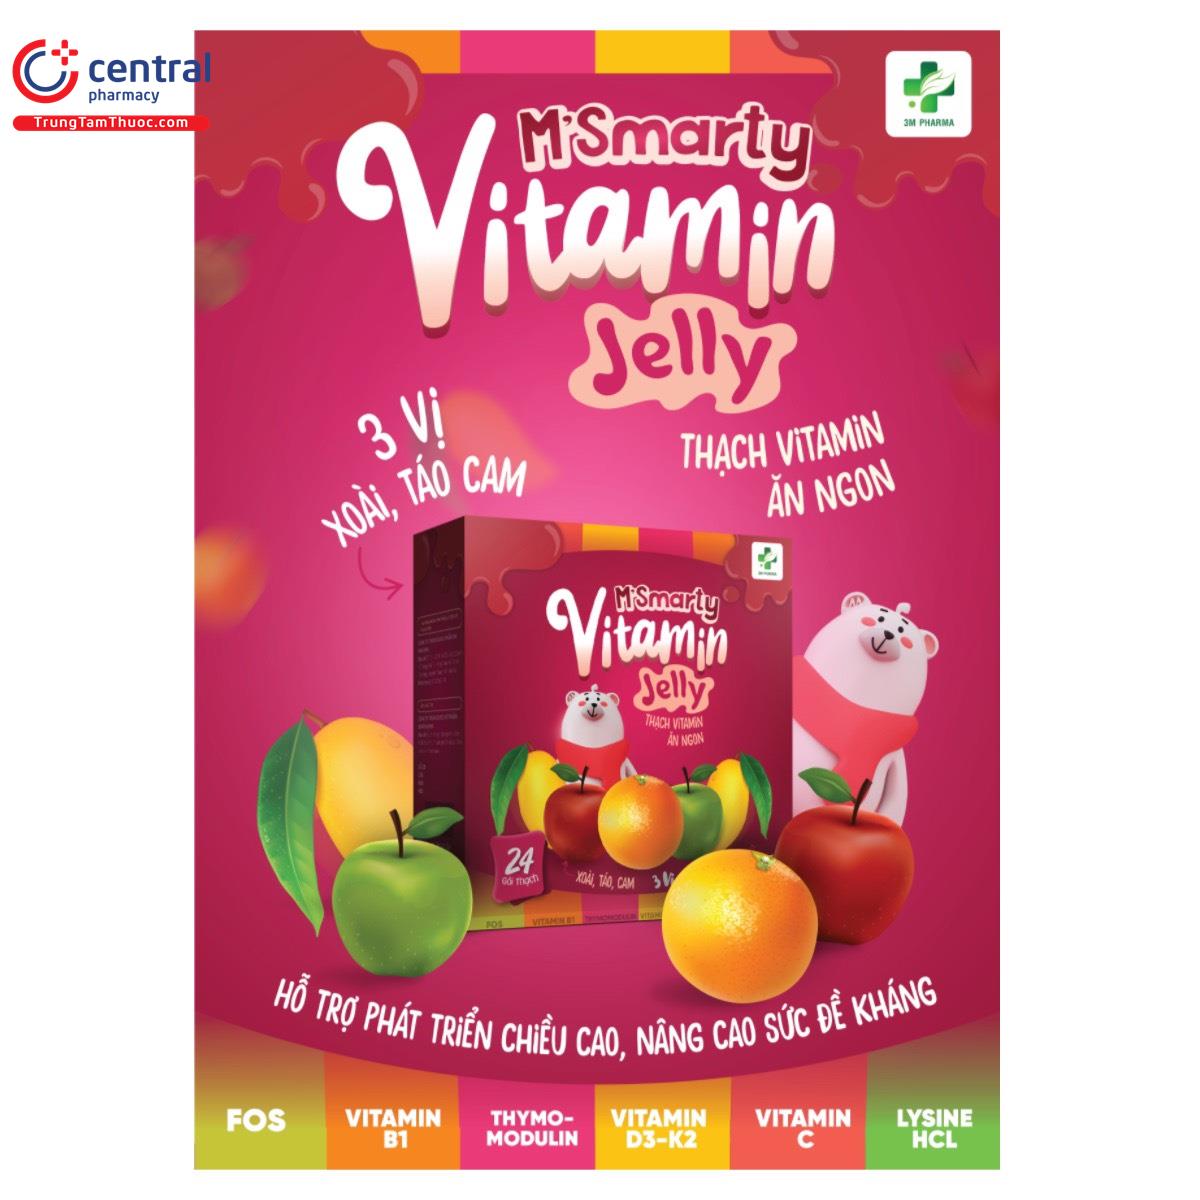 thach vitamin m smarty hdsd 1 A0028